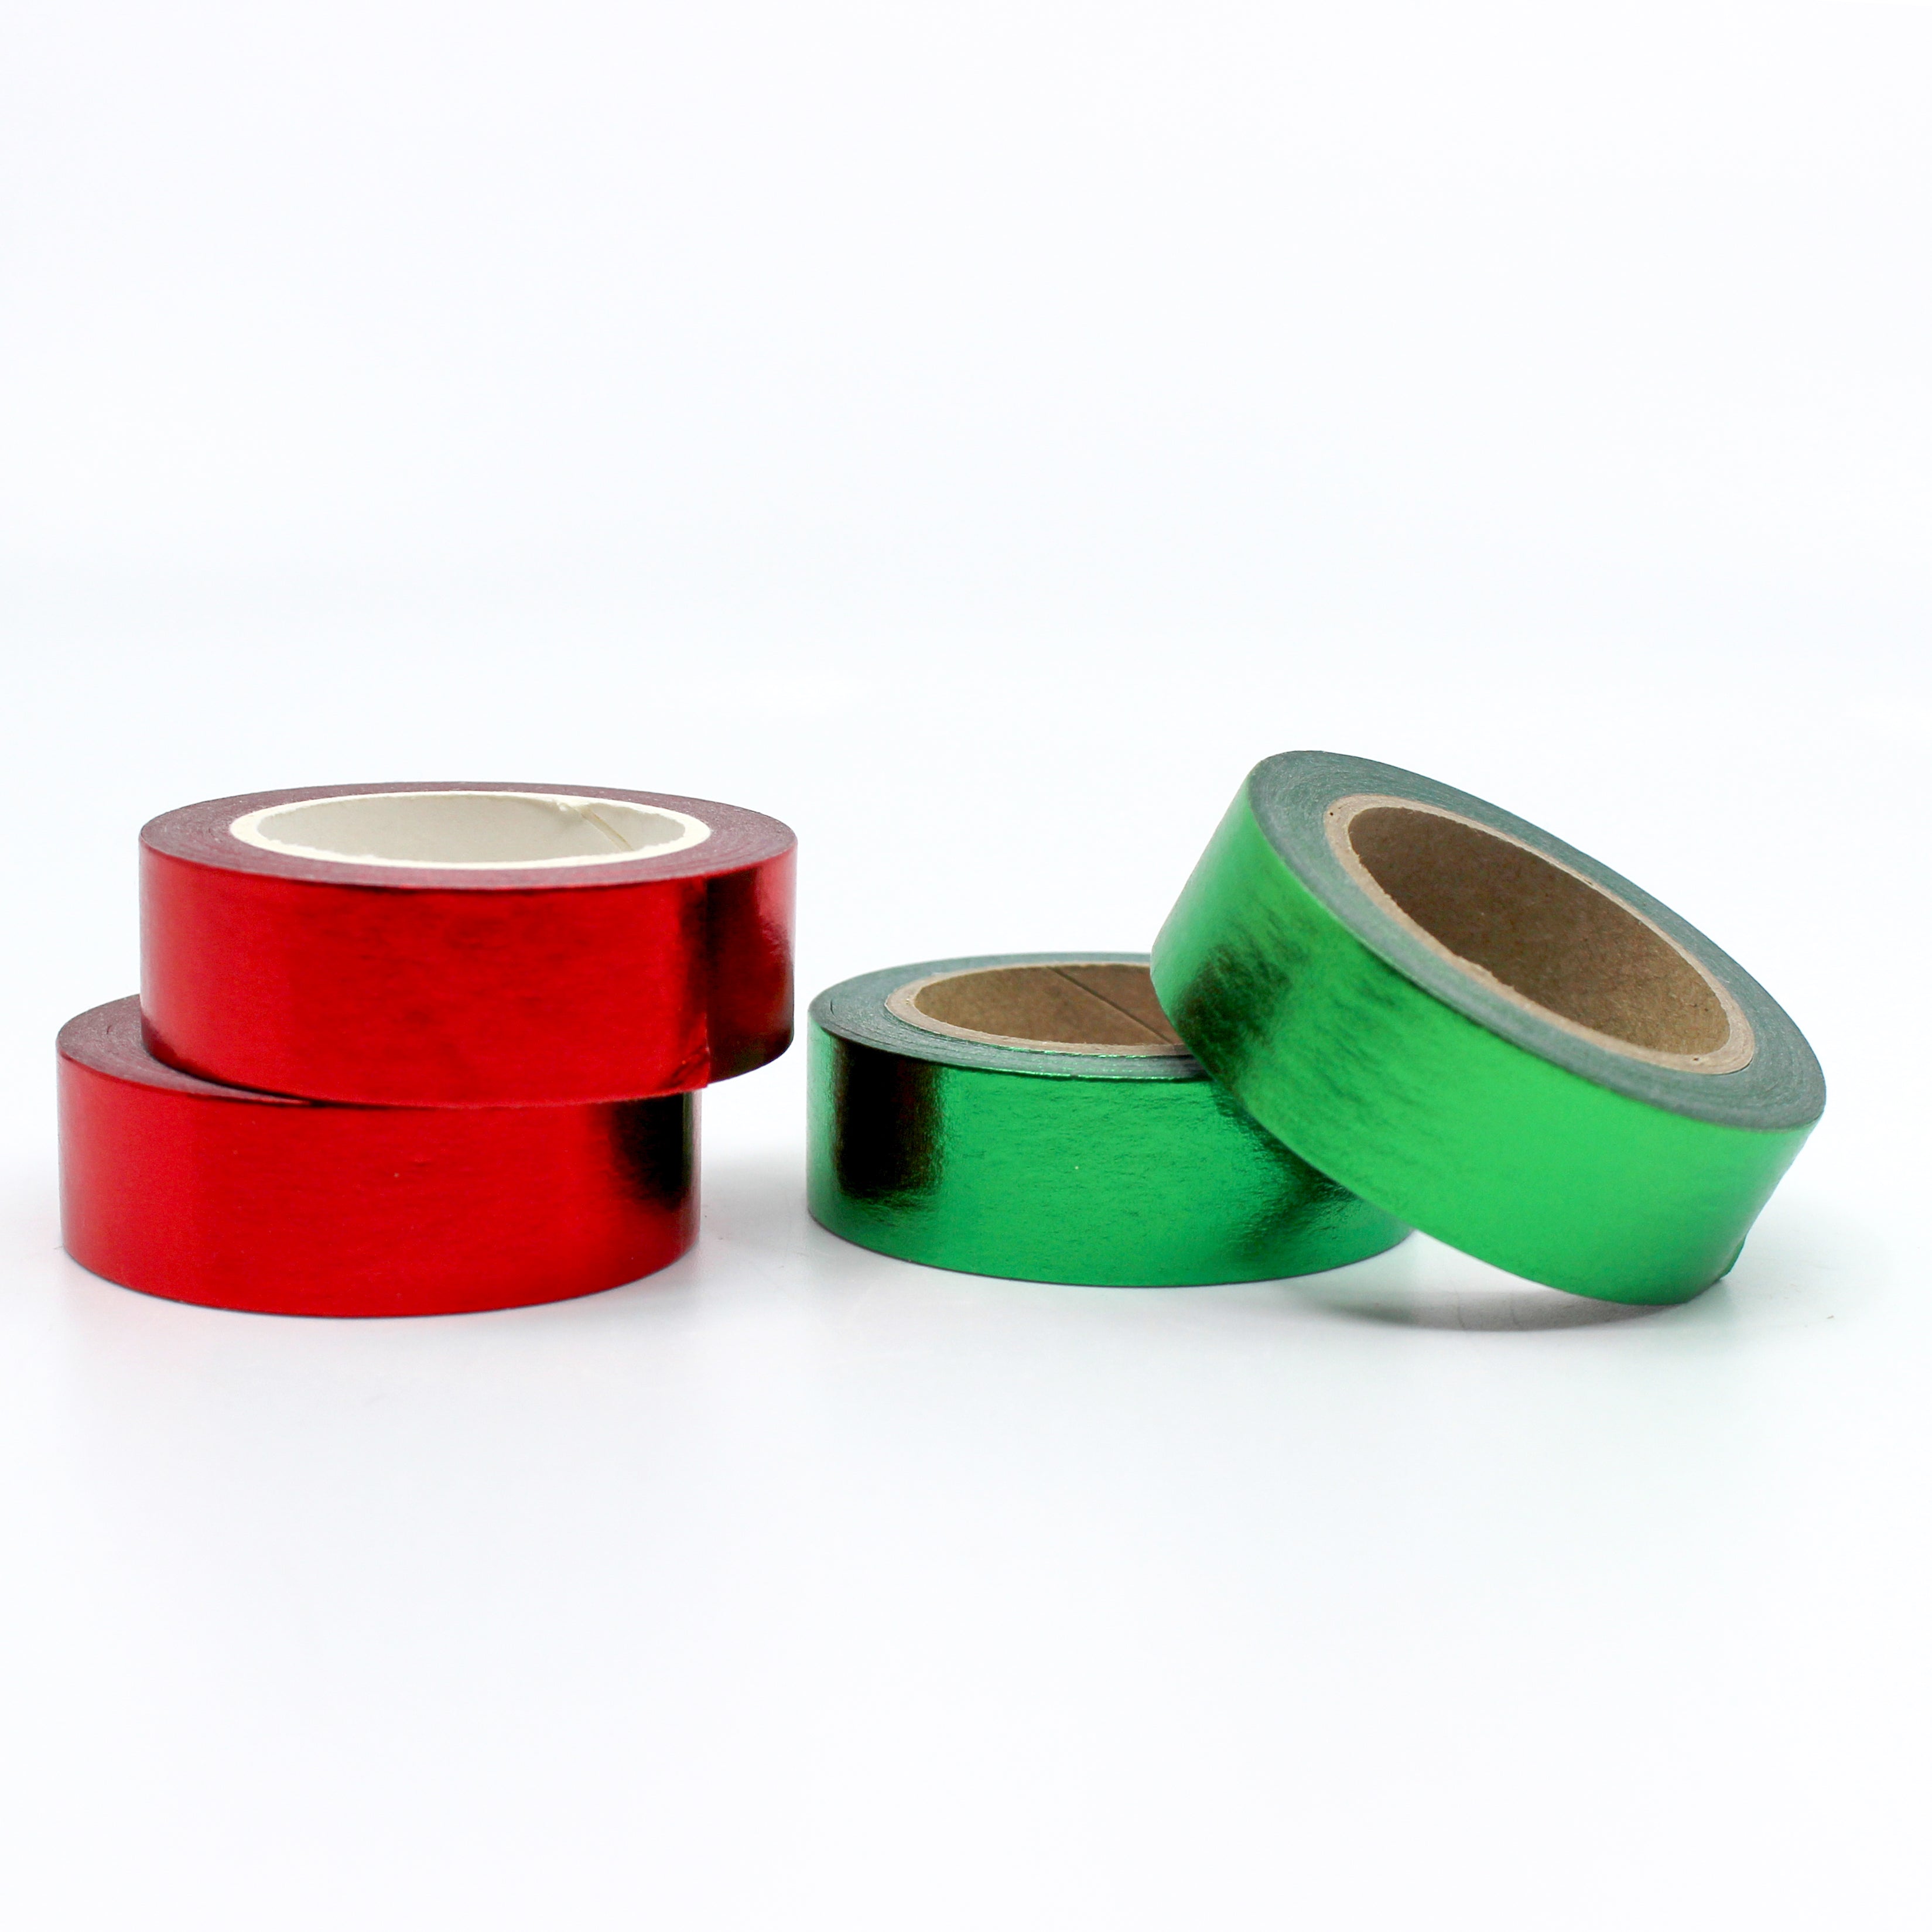 Add a touch of elegance to your crafts with our dazzling red foil washi tape, featuring a shimmering metallic finish that catches the light. This tape is sold at BBB Supplies Craft Shop.